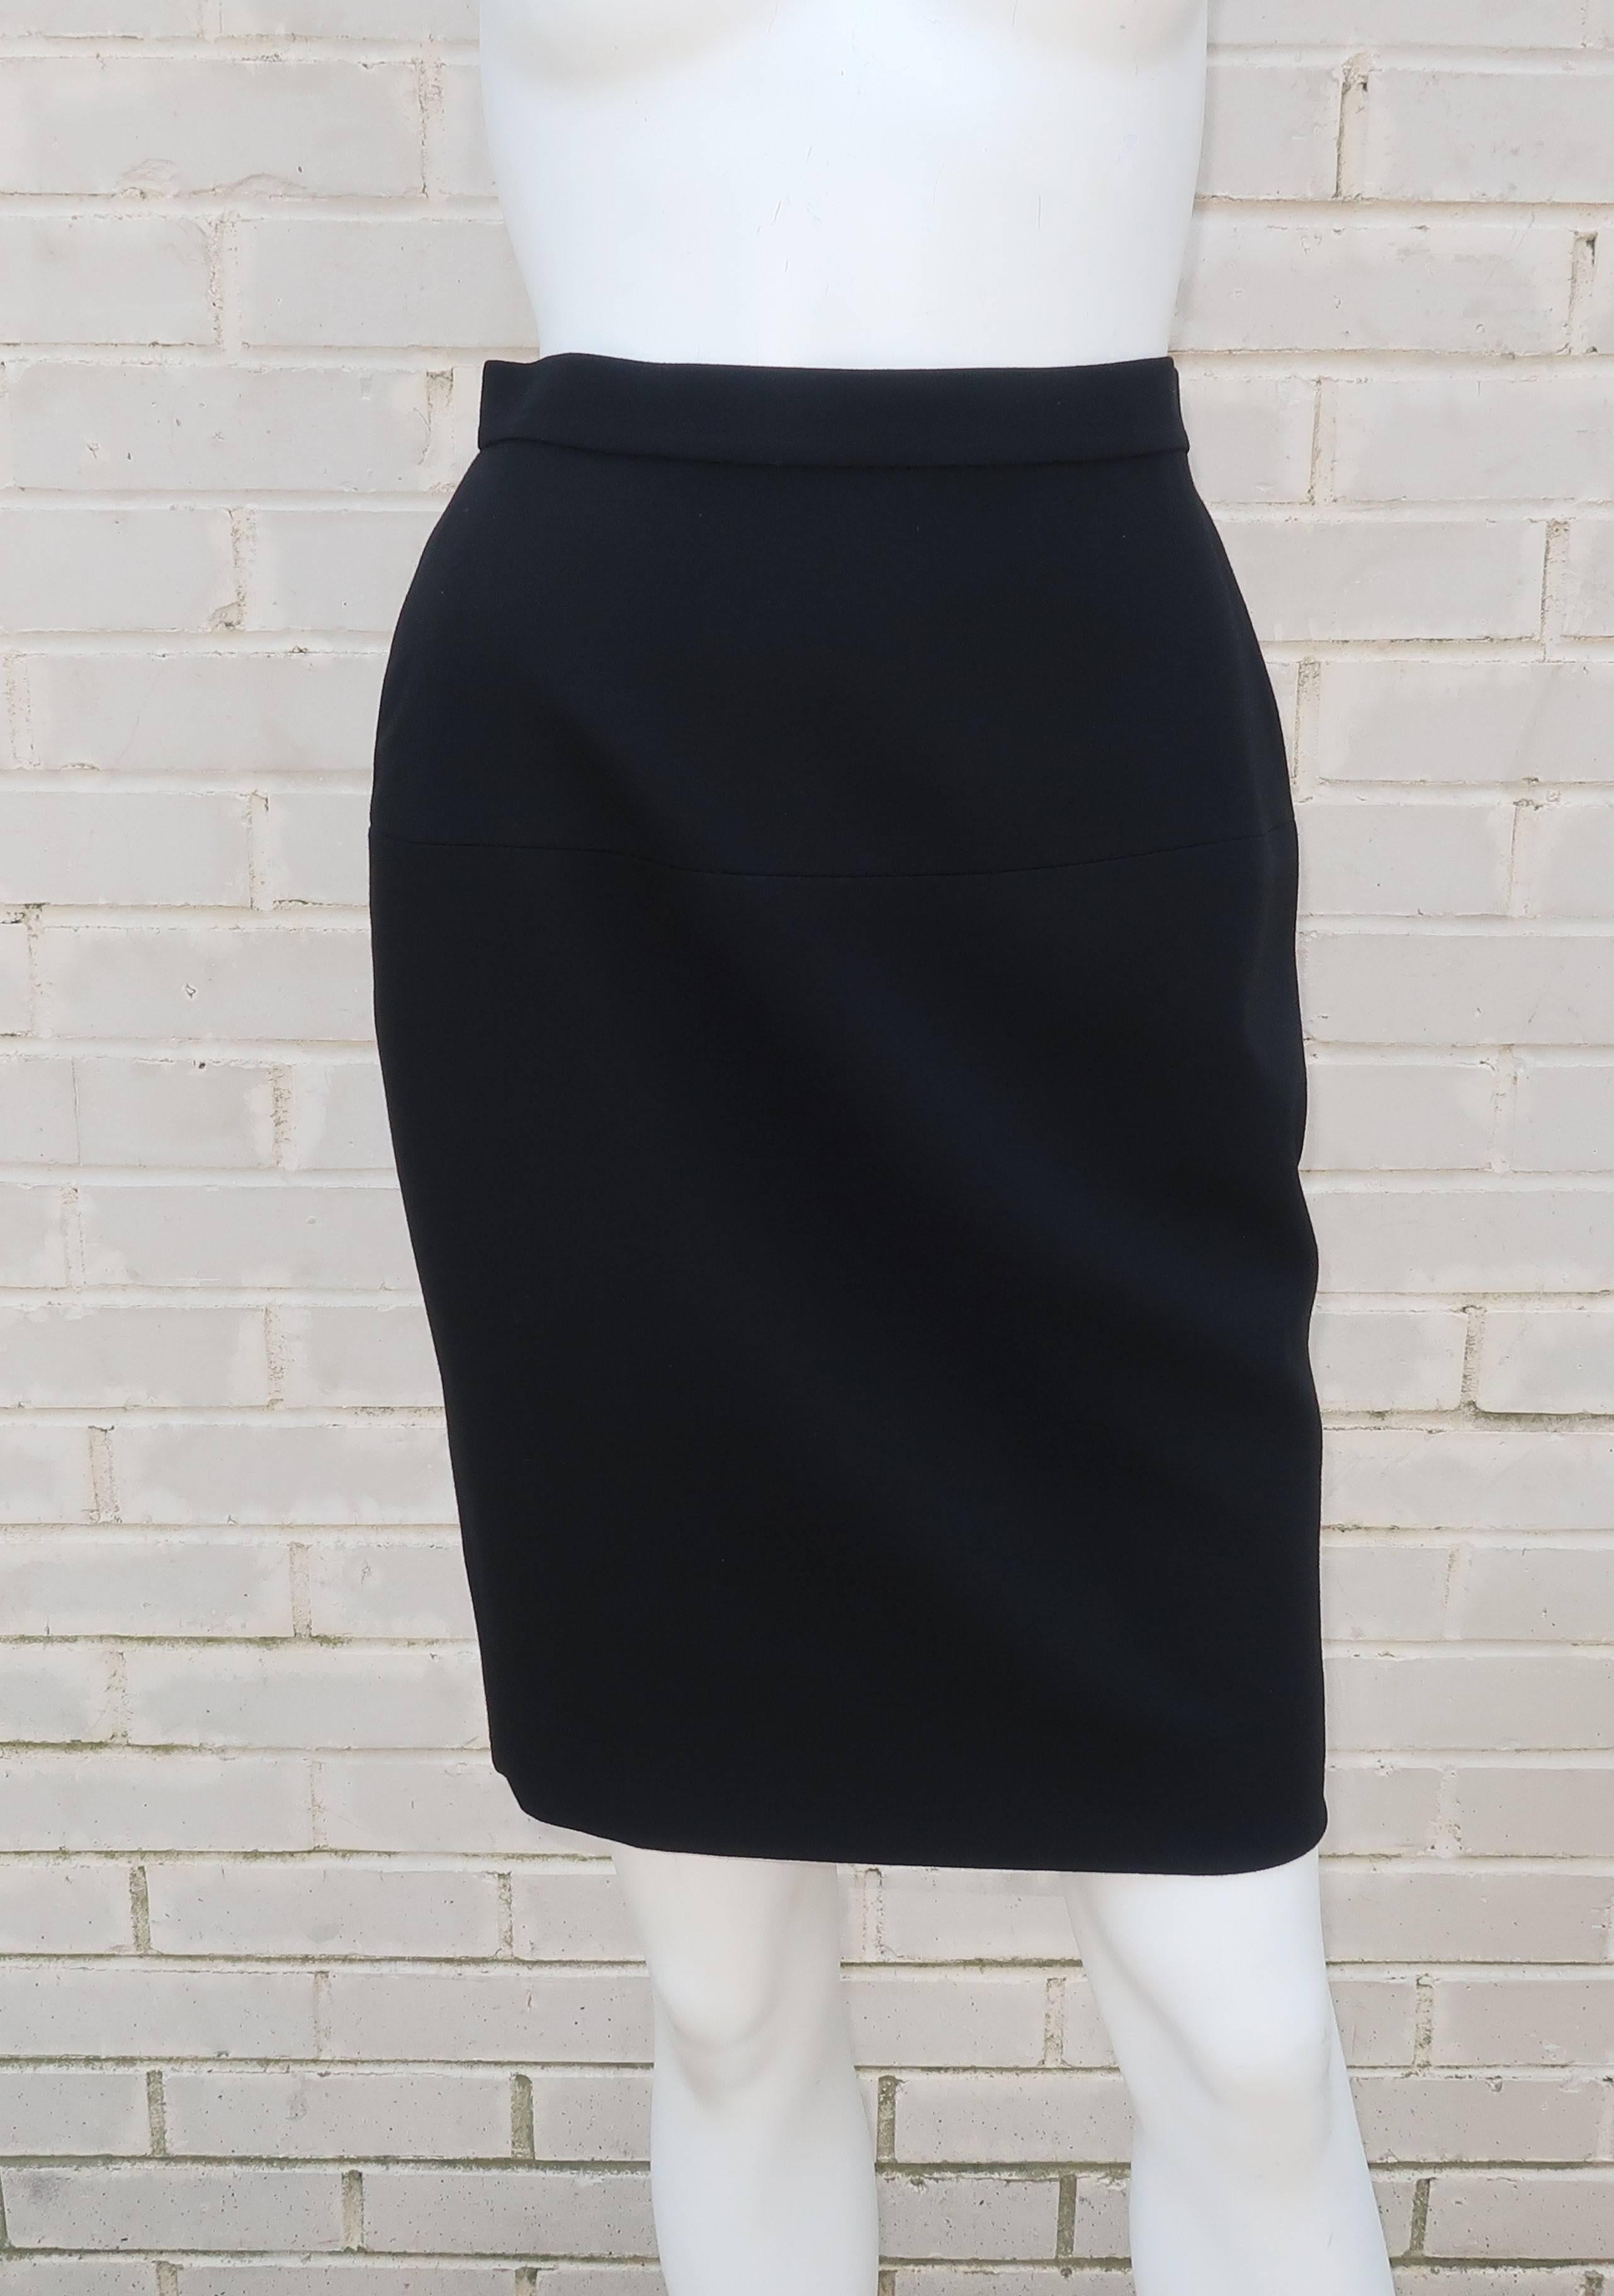 This classic Chanel black skirt knows no seasons and can be worn to achieve many looks all year long.  The skirt zips and buttons at the back with a gold tone Chanel 'CC' logo button at the waistband.  For added interest, there is a subtle skirt